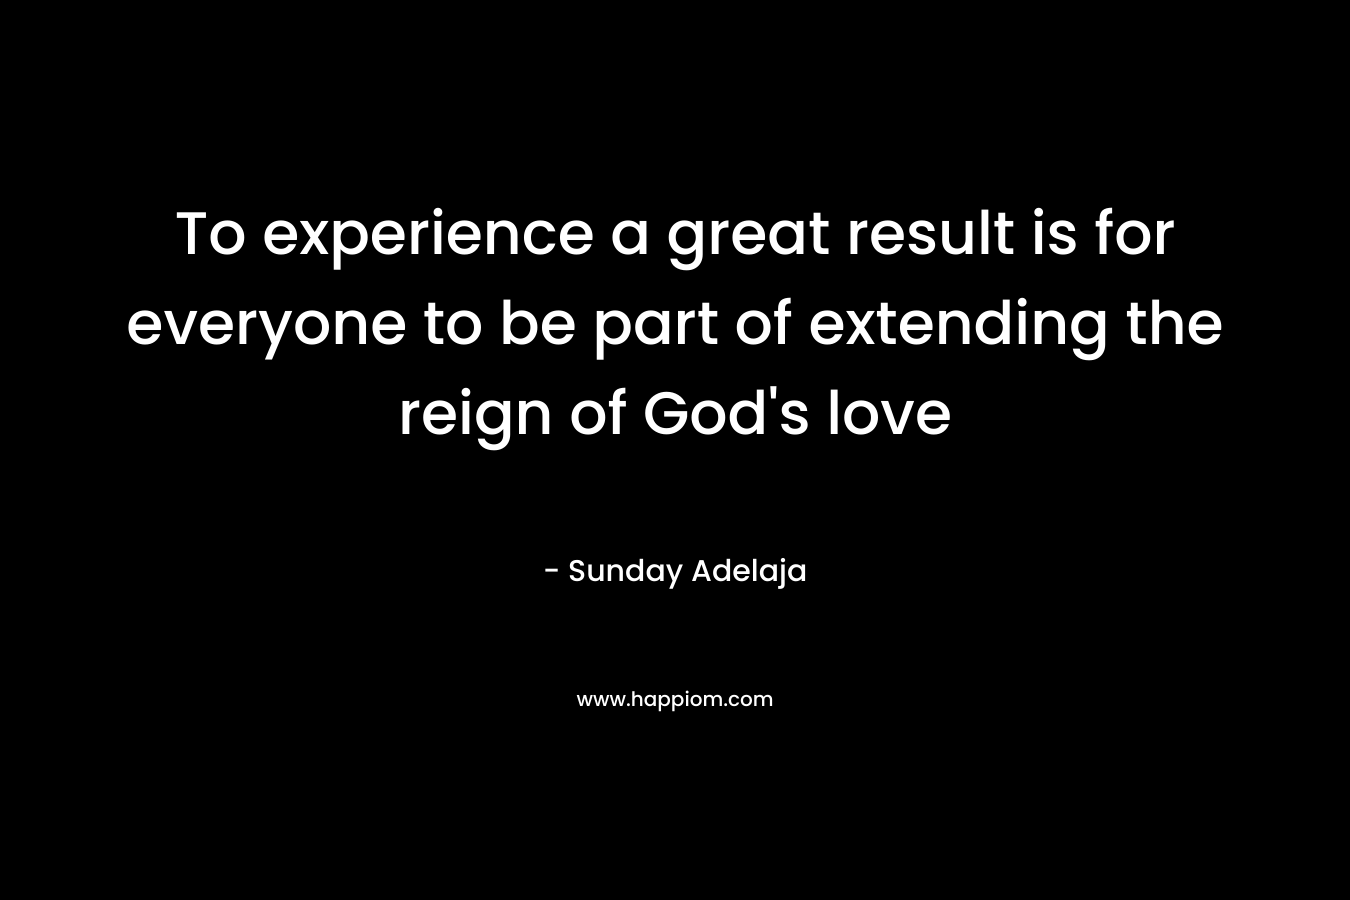 To experience a great result is for everyone to be part of extending the reign of God's love